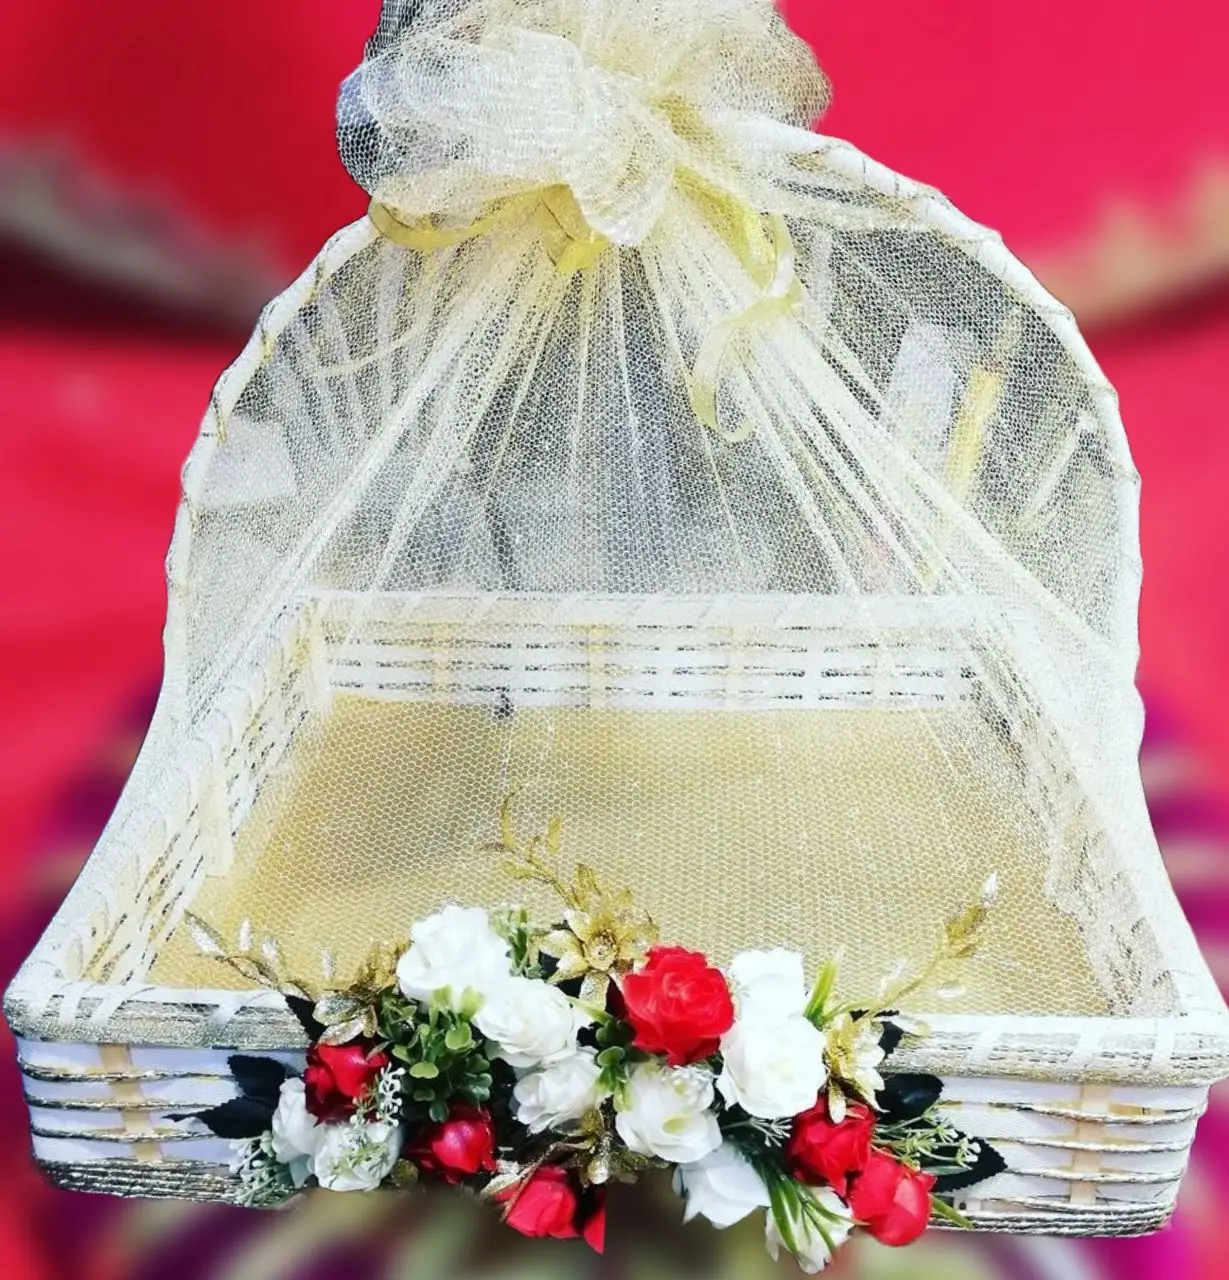 10 Gift Ideas For Newly Weds This Wedding Season If You're On A Budget!